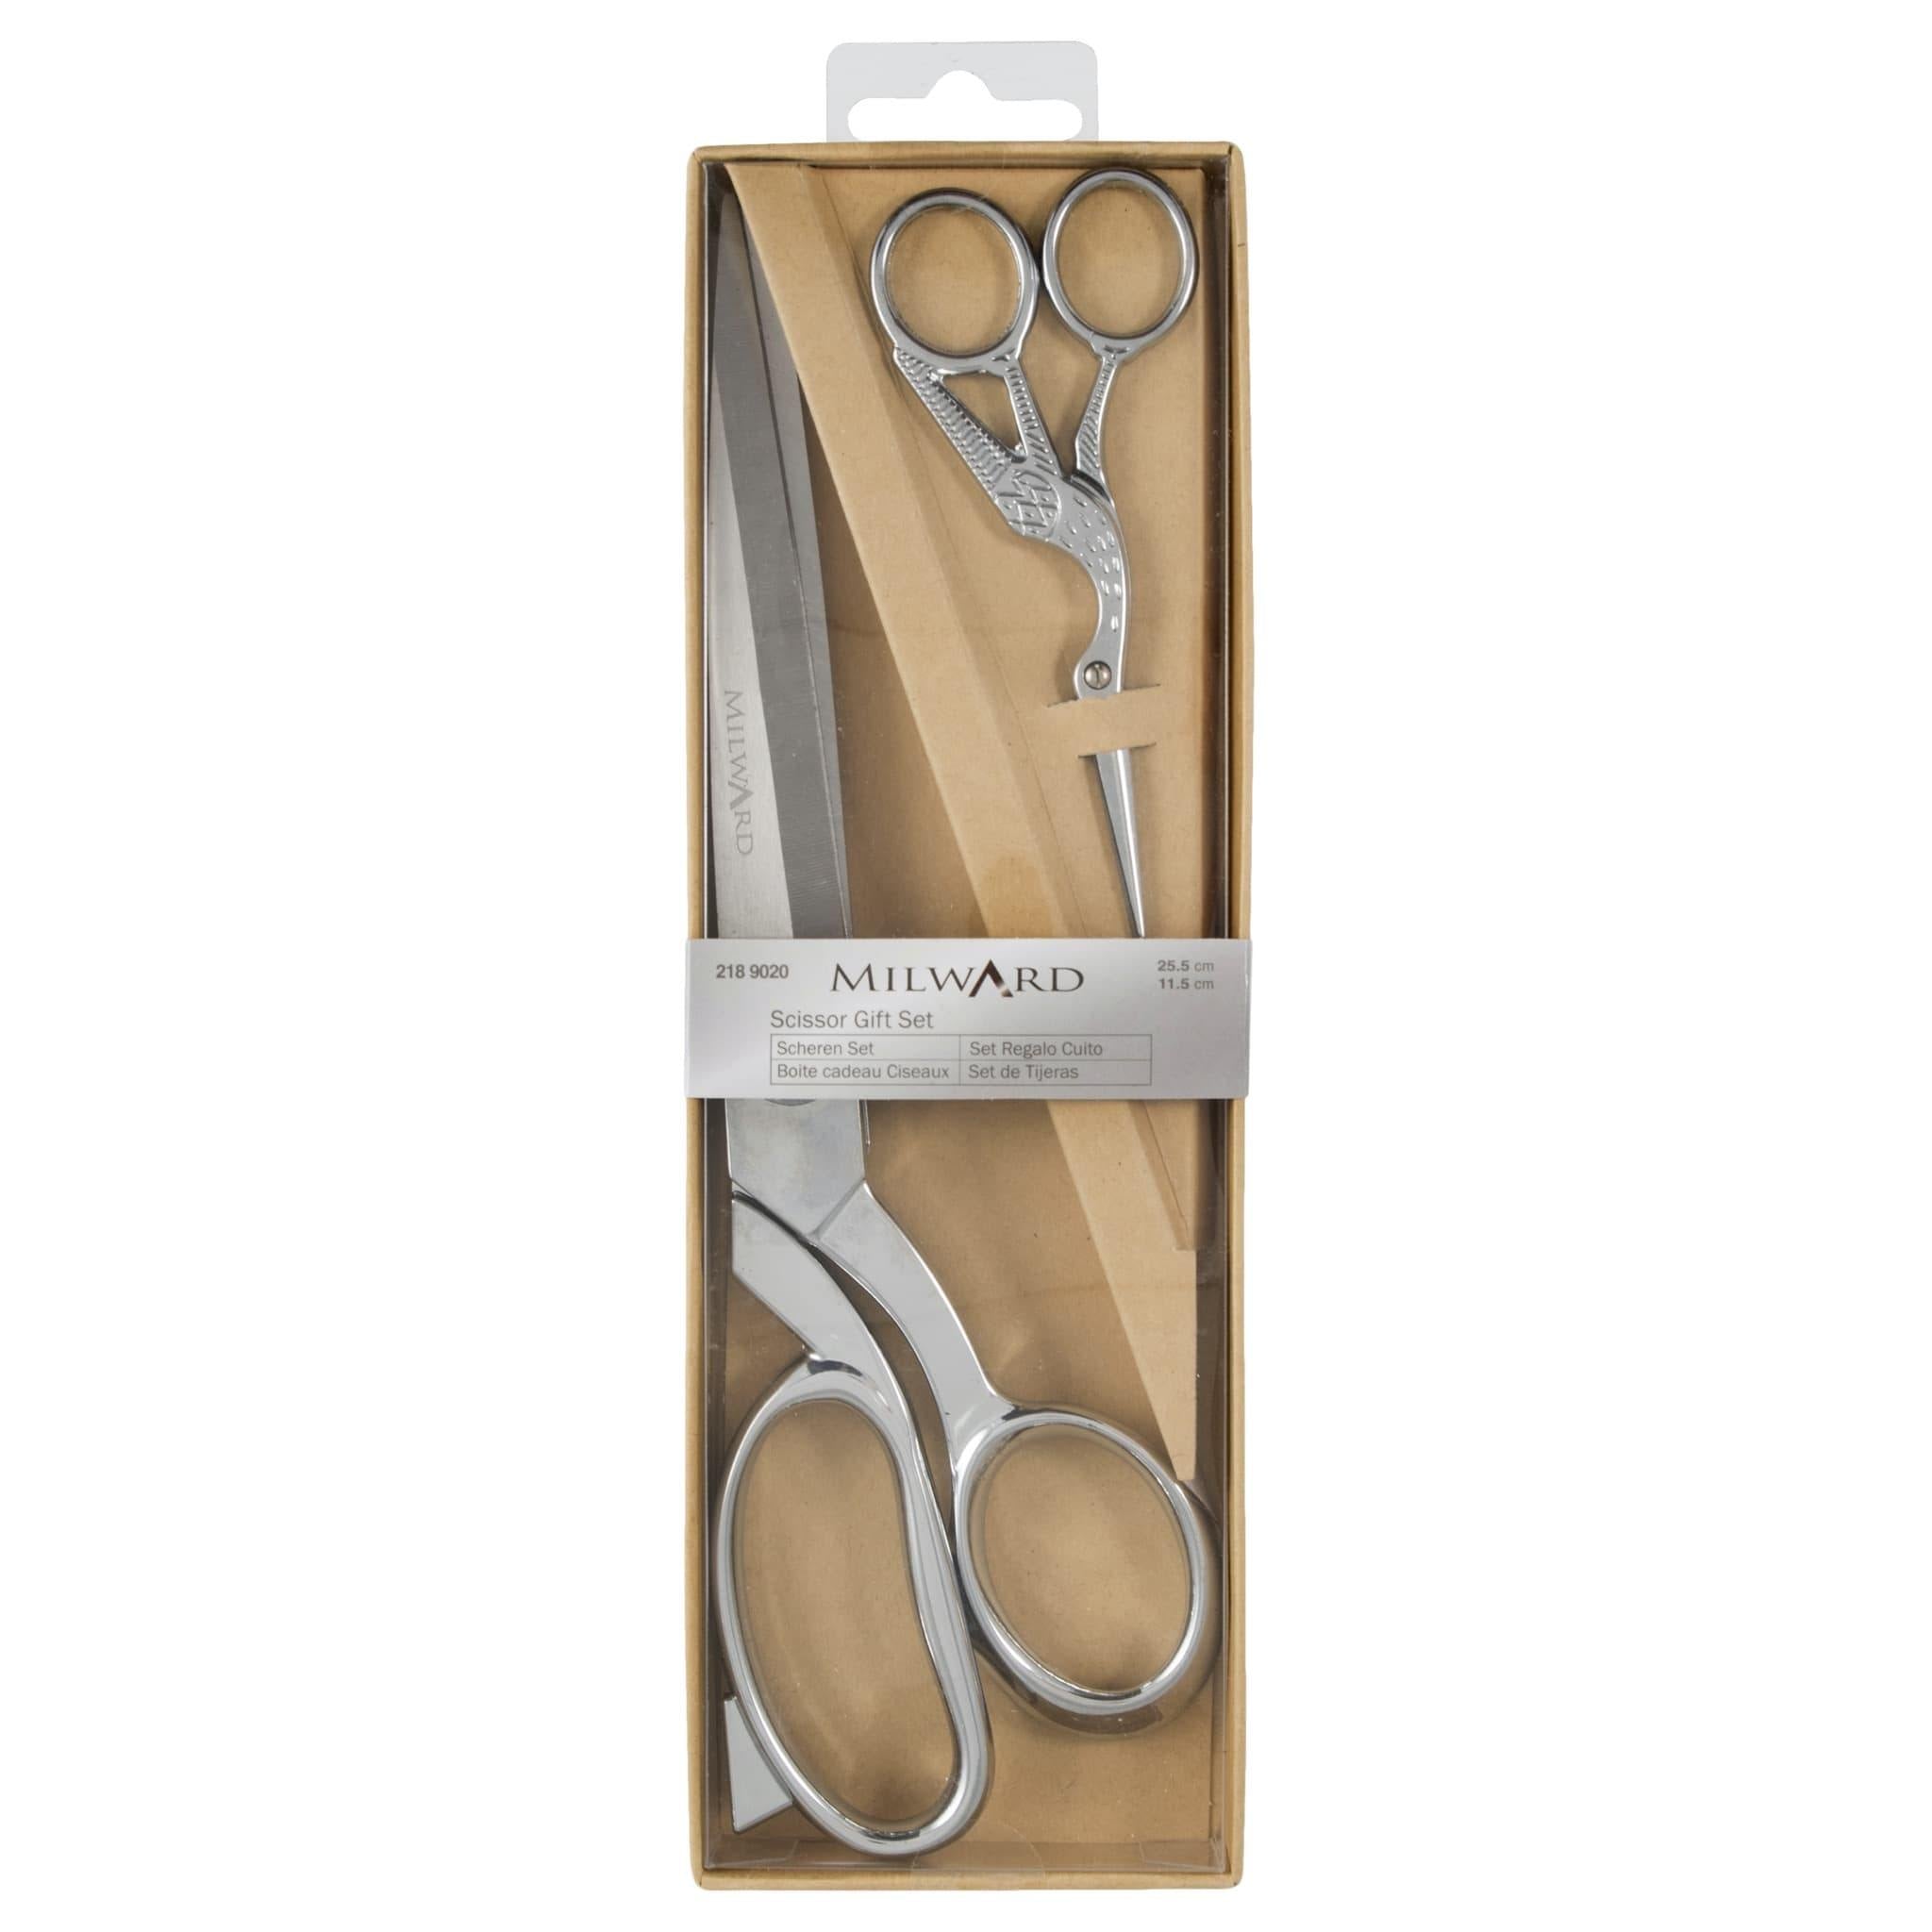 Milward Silver Dressmaking - 25cm and Embroidery - Gift Set